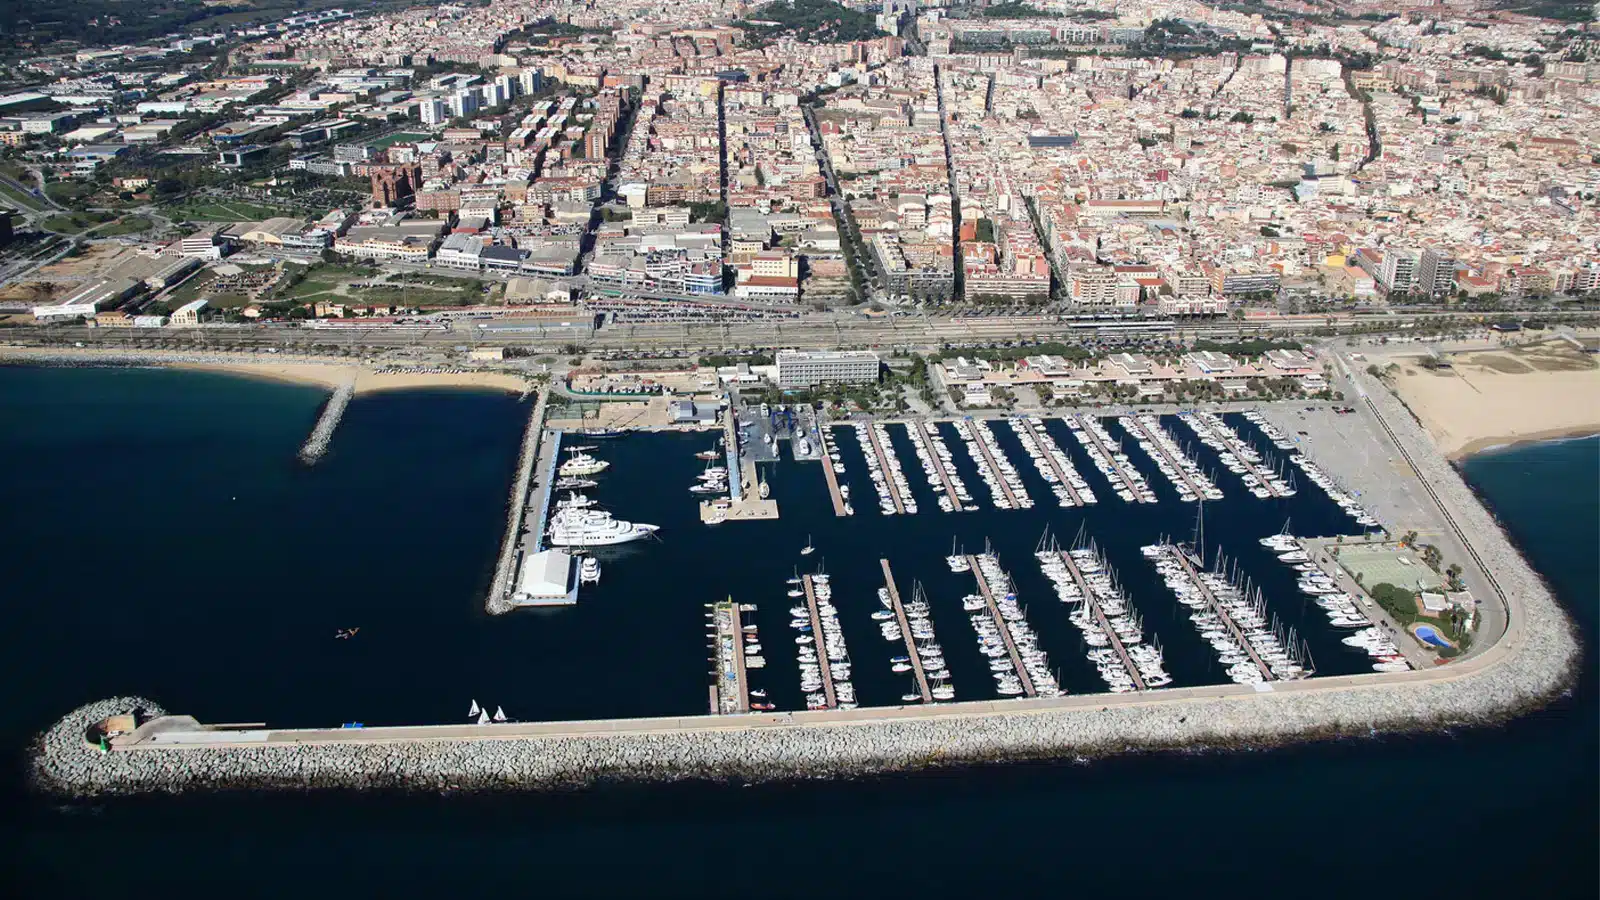 The Catalonia International Boat Show is born: first edition scheduled from May 17-19